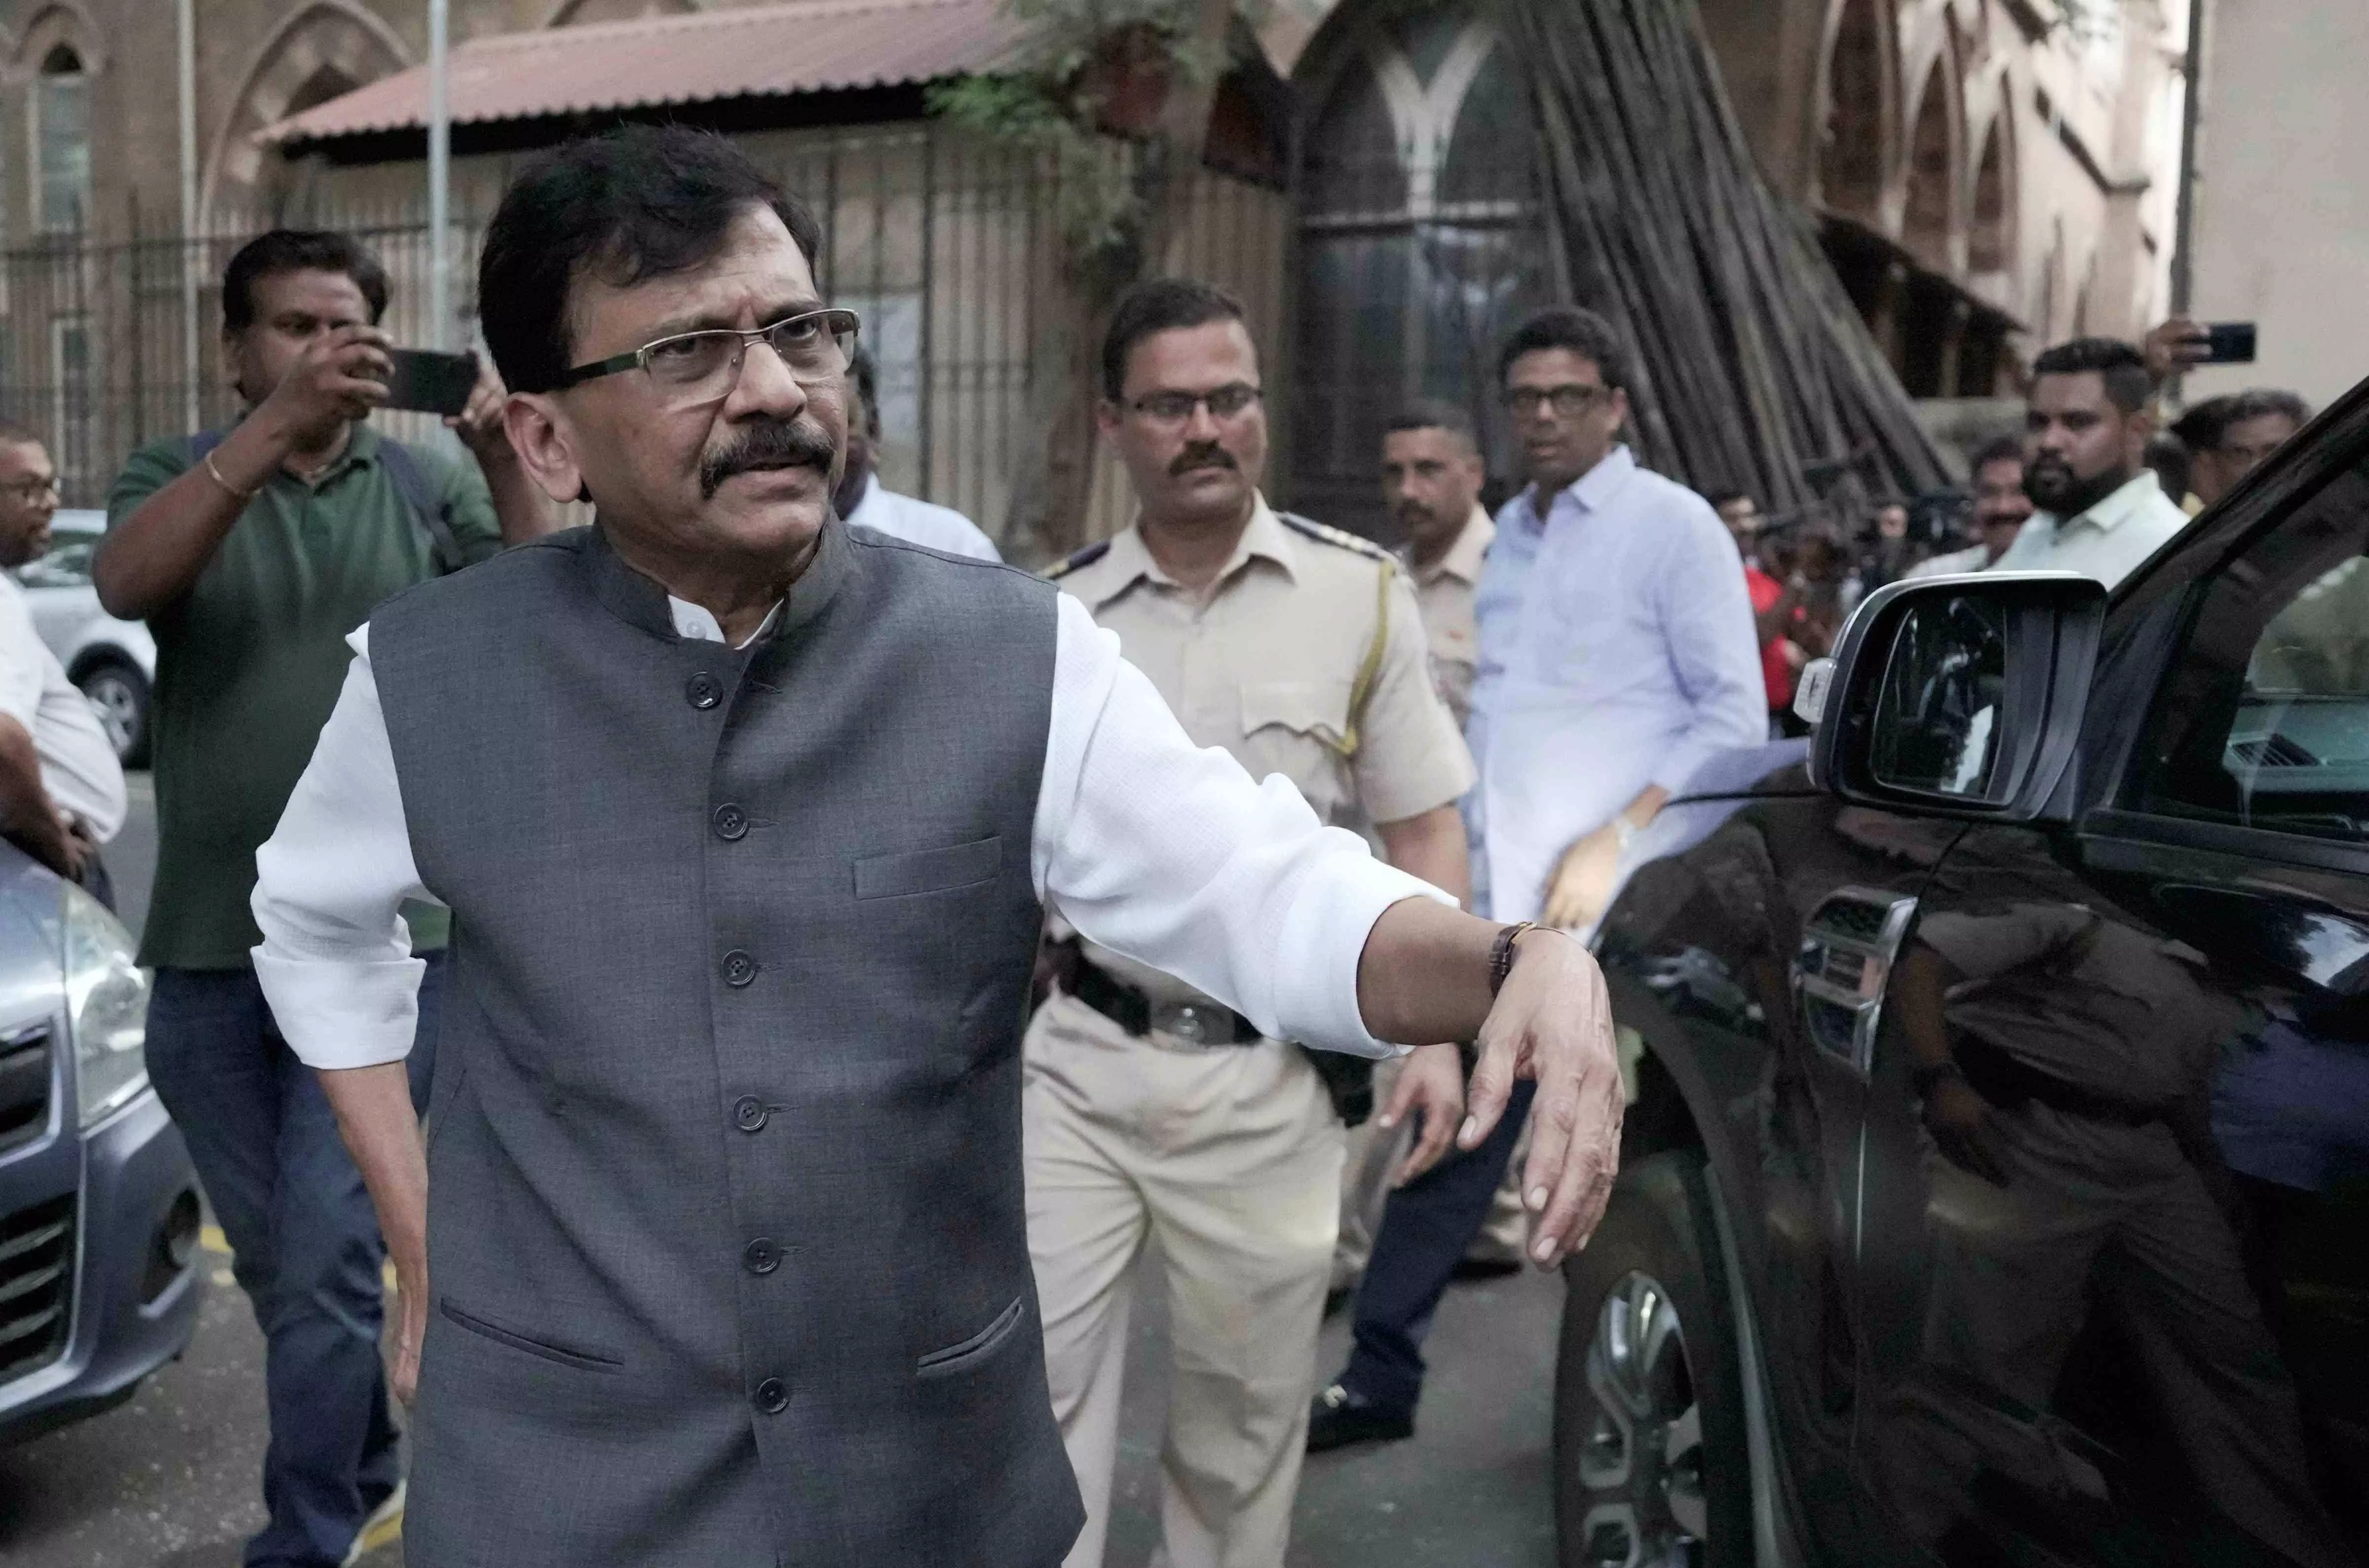 Hoping for justice from EC: Sanjay Raut, says real Shiv Sena is led by Uddhav